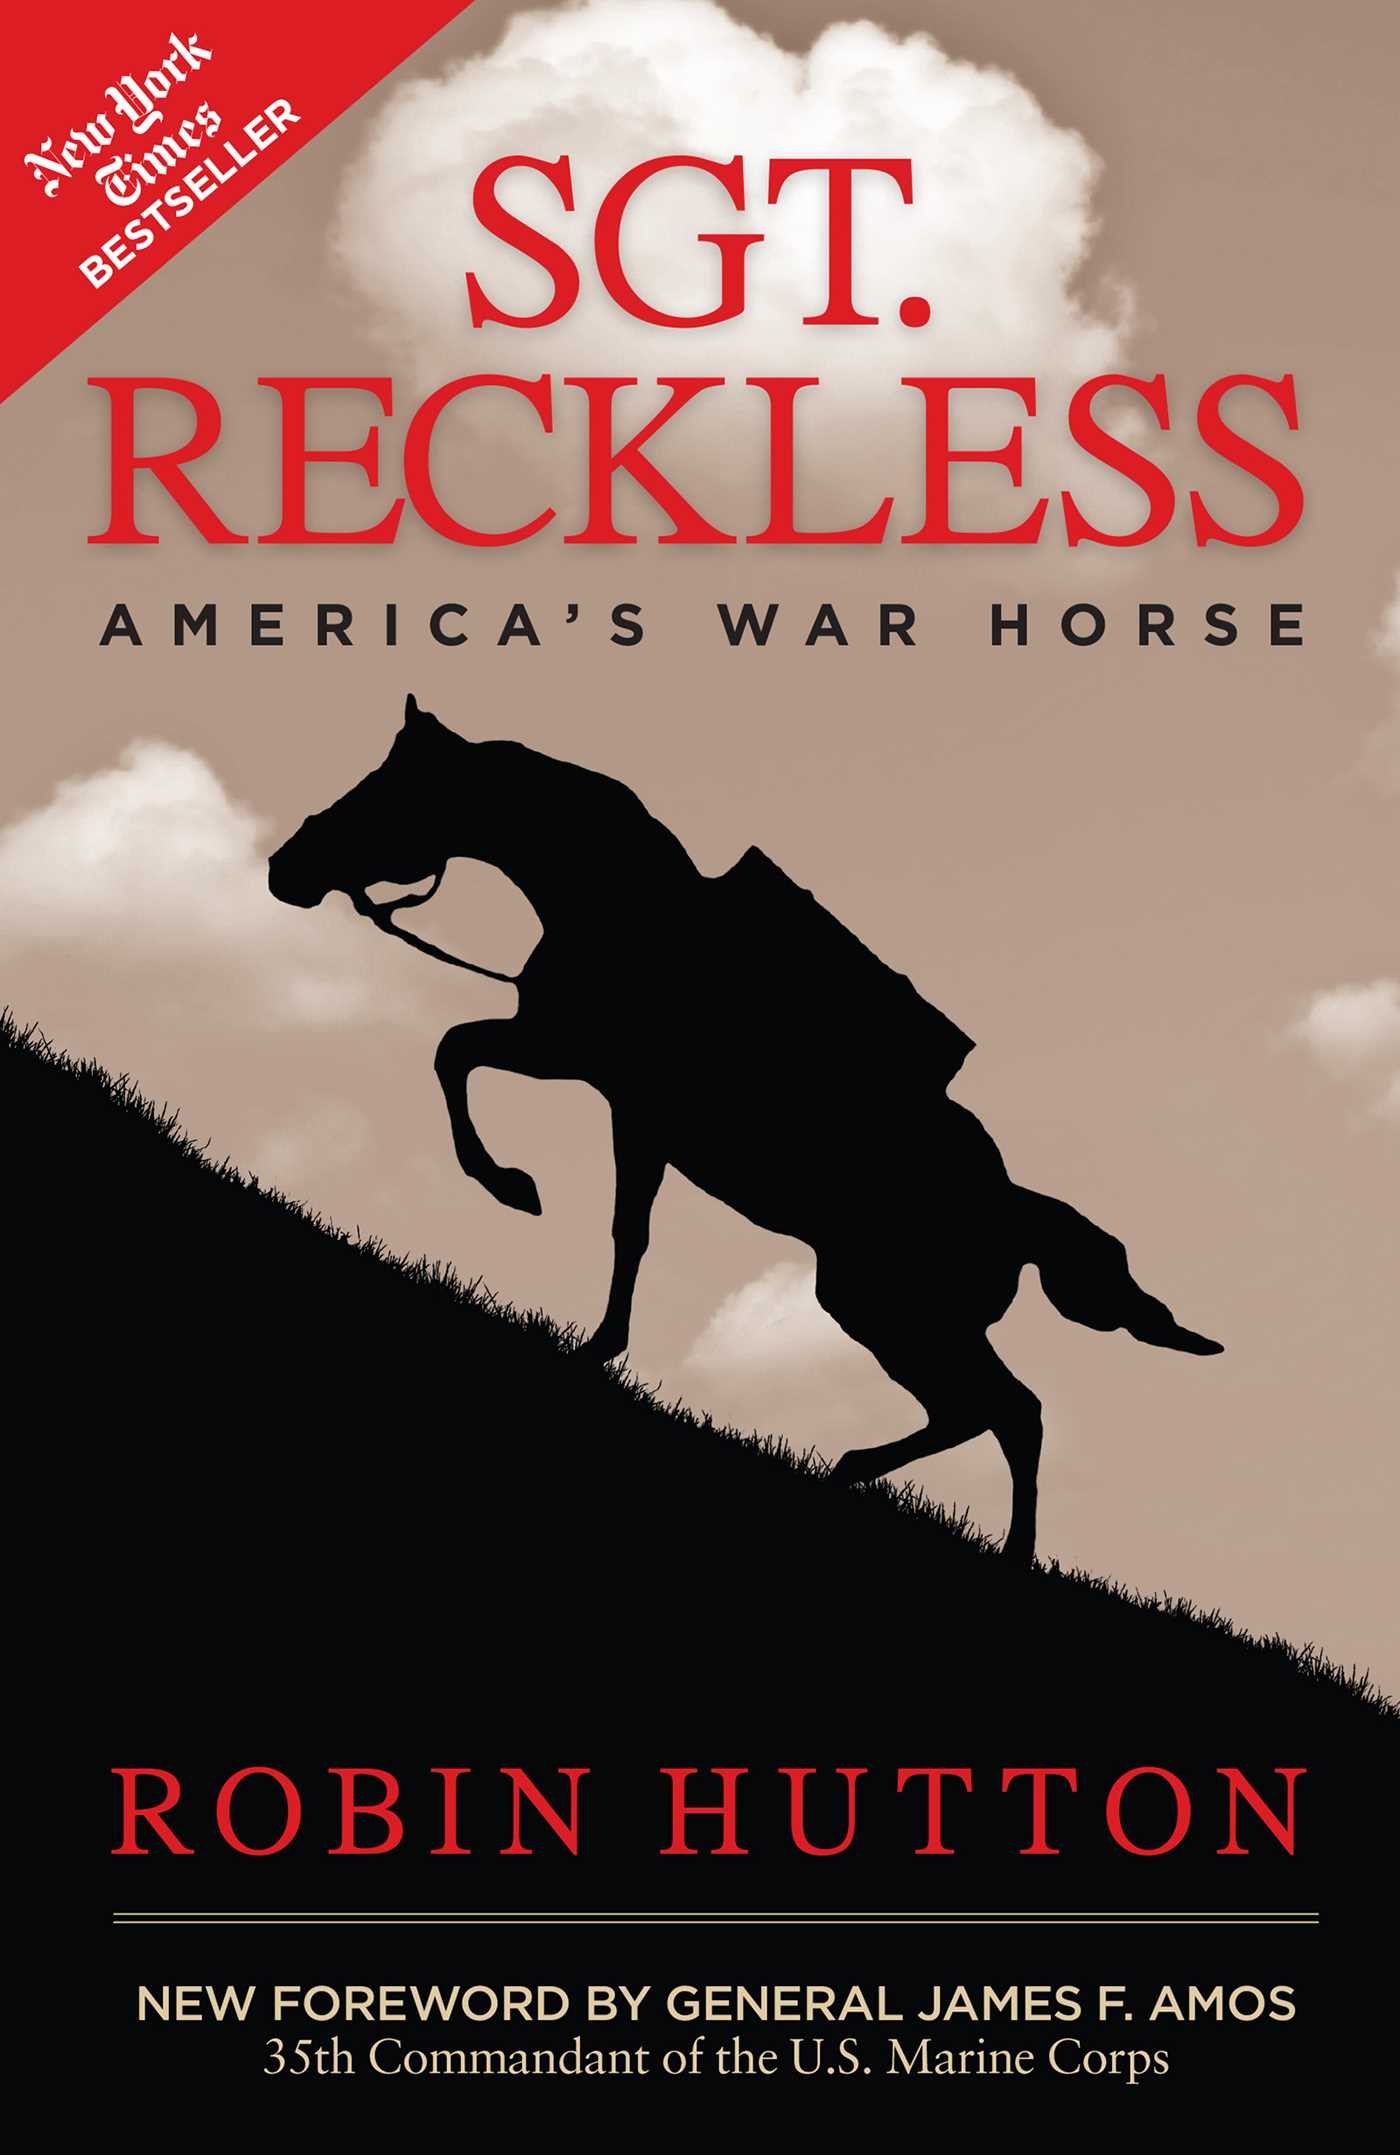 Image for "Sgt. Reckless"